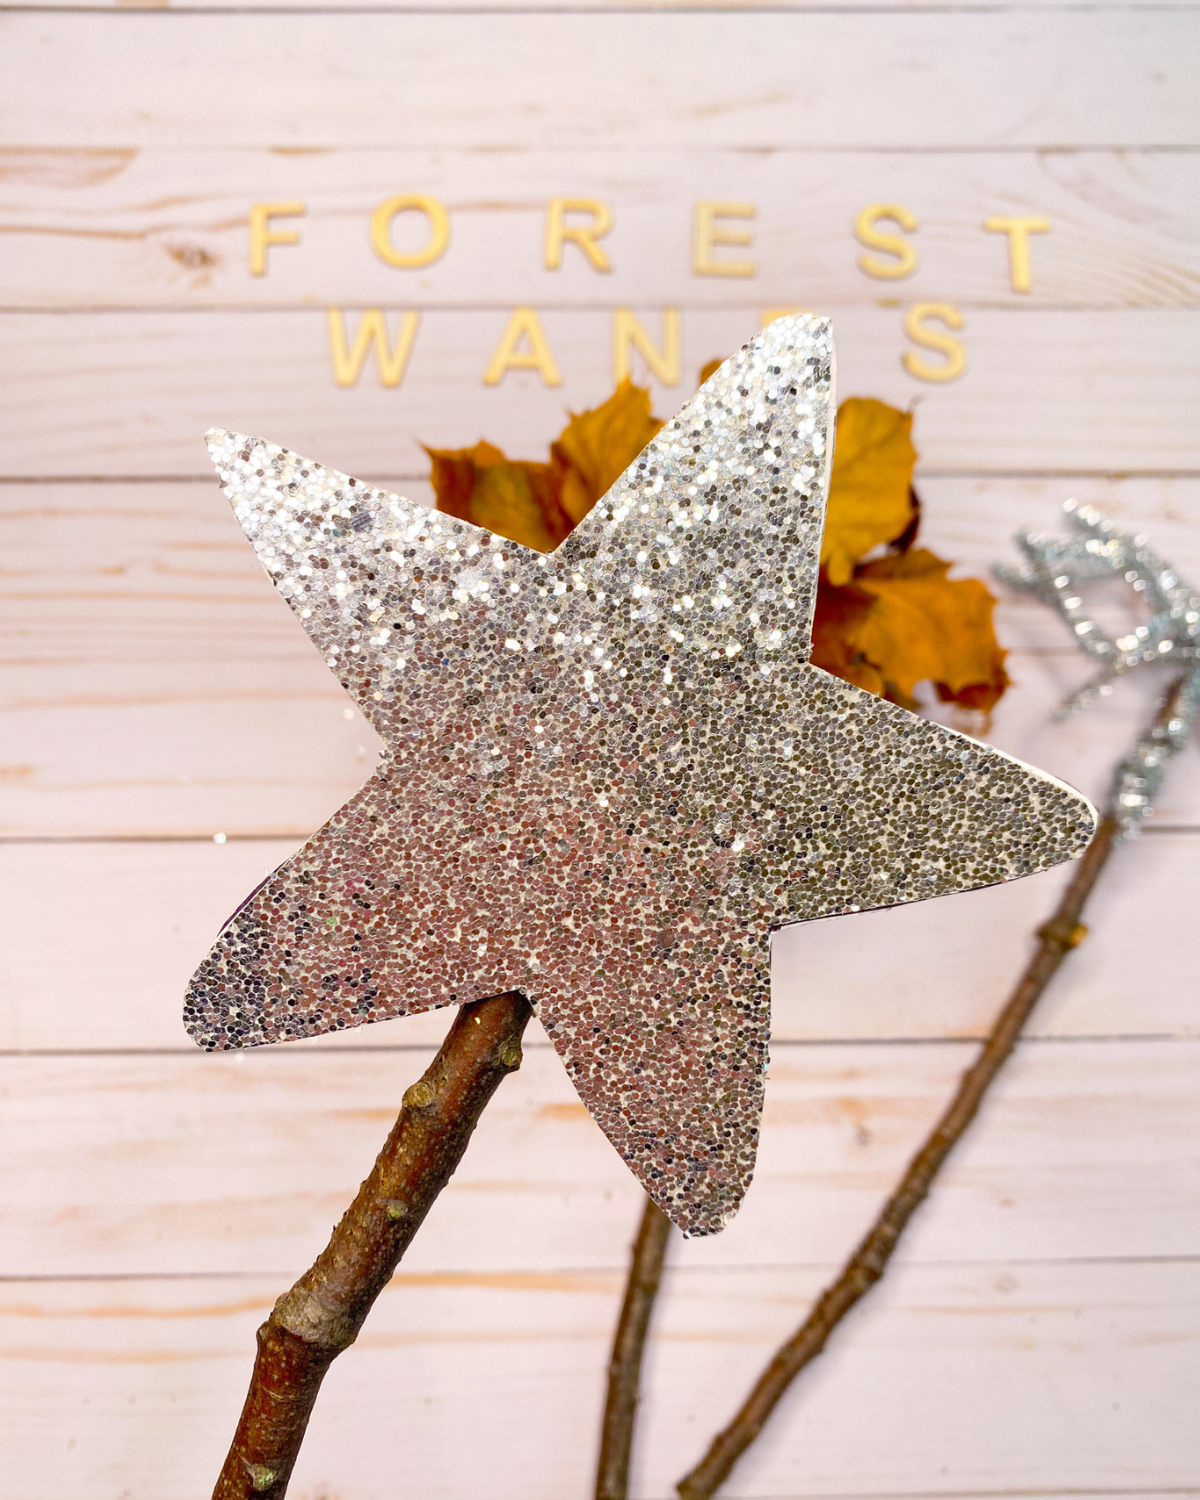 Fall-crafts-for-kids-magical-forest-wands-star.png